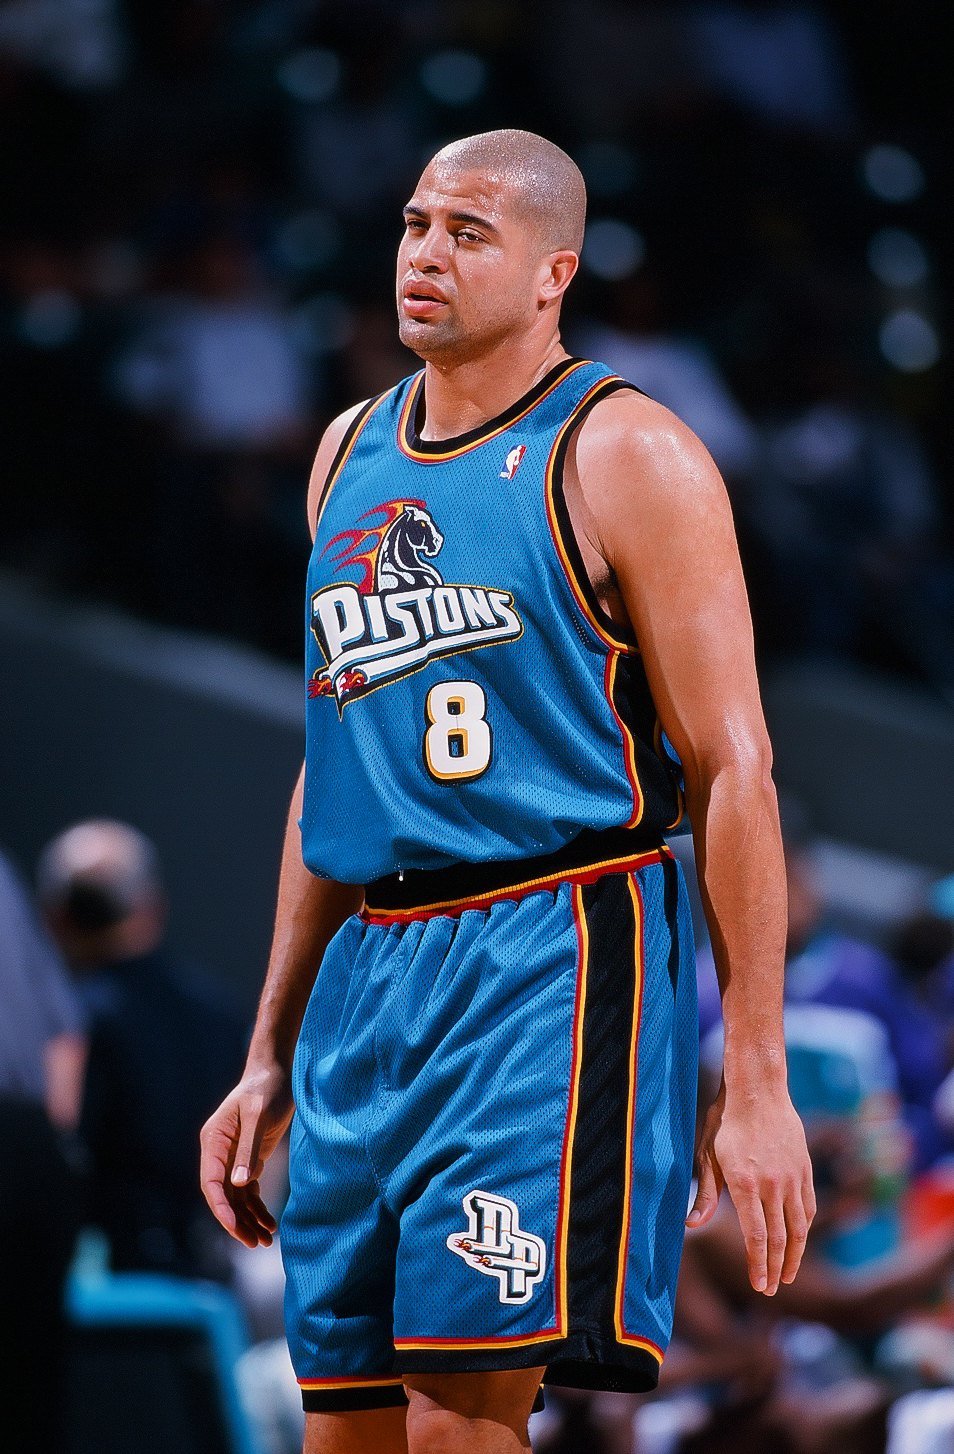 Bison Dele playing for the Detroit Pistons in the late '90s | Photo: Getty Images